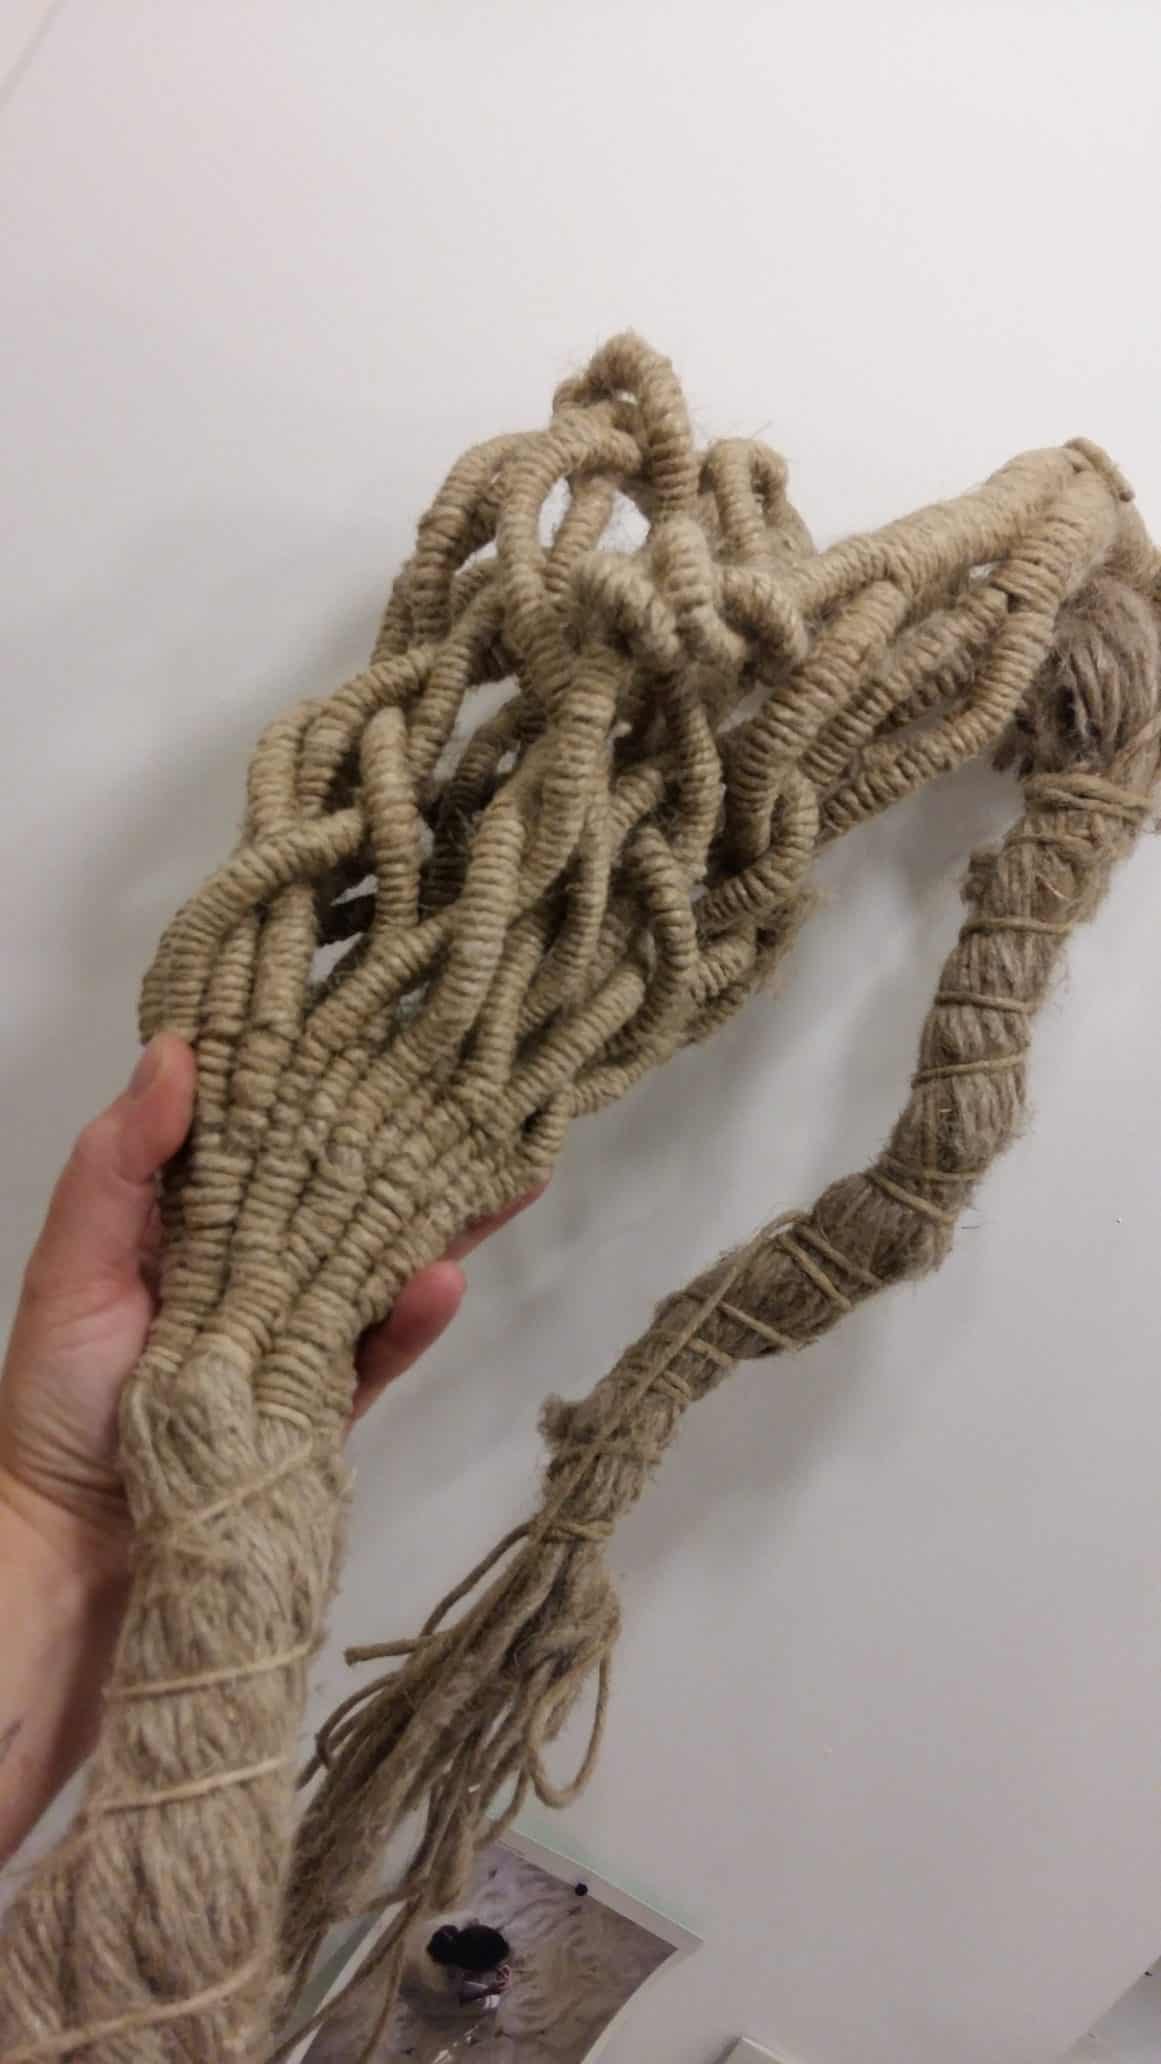 raw linen fibres being transformed into a scupture by Aude Franjou